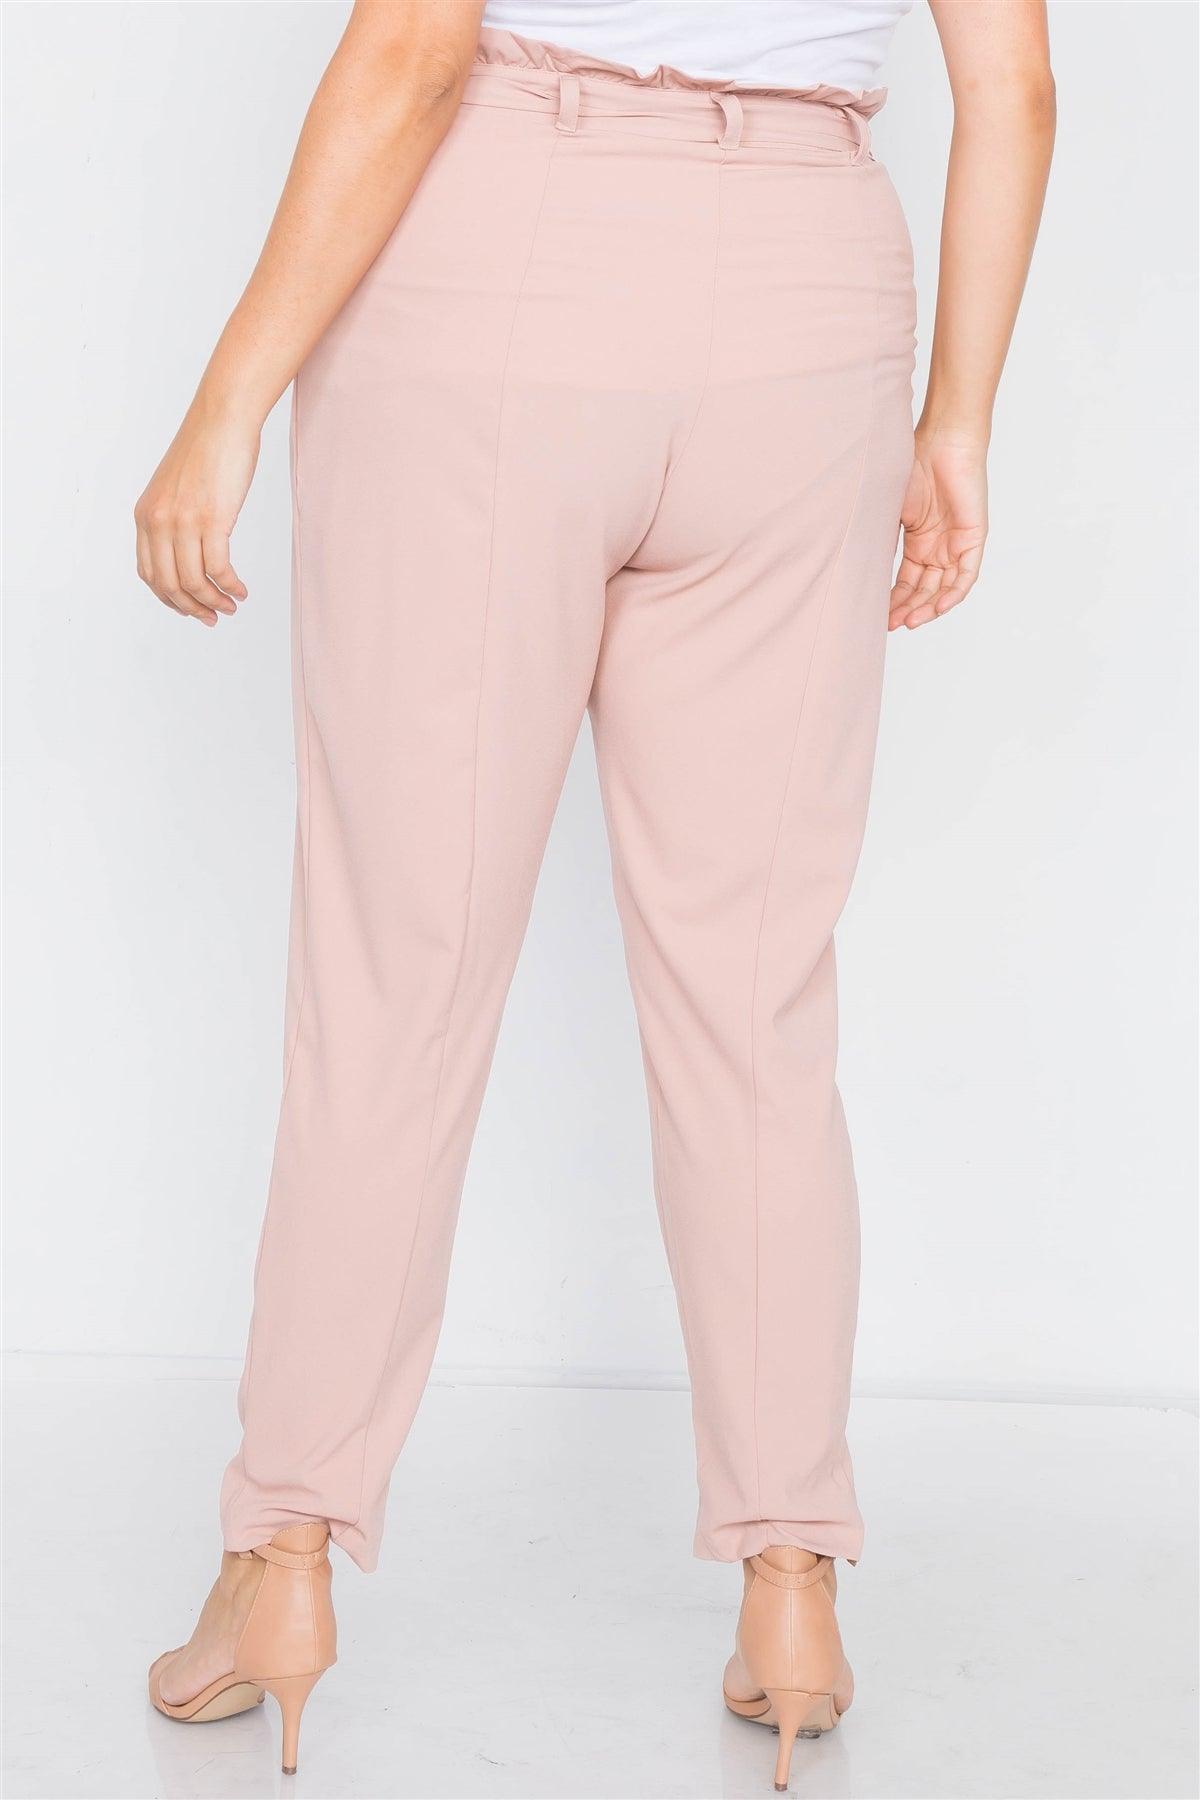 Plus Size Mauve Ruched High-Waist Chic Pleated Pants /3-2-1